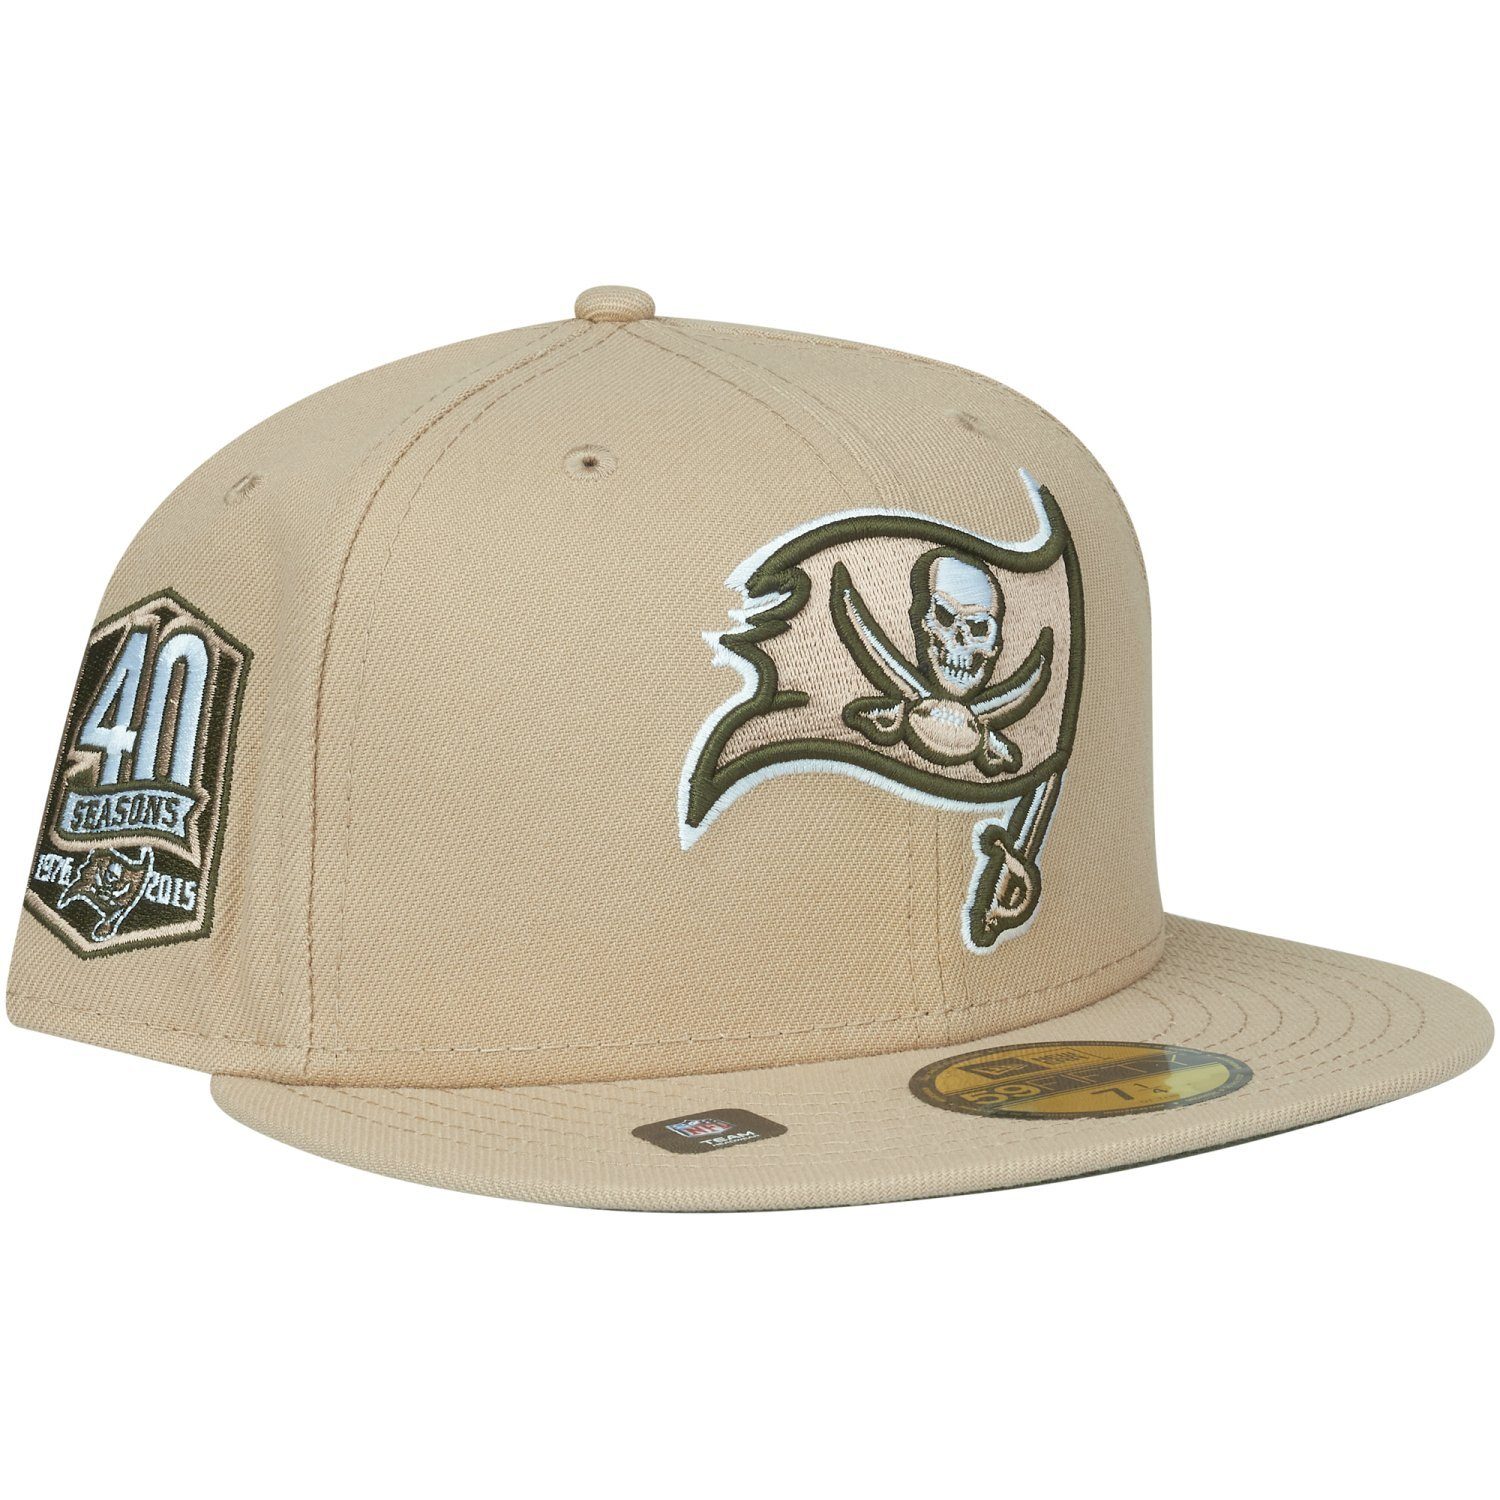 Cap ANNIVERSARY New 59Fifty Teams Fitted NFL Era